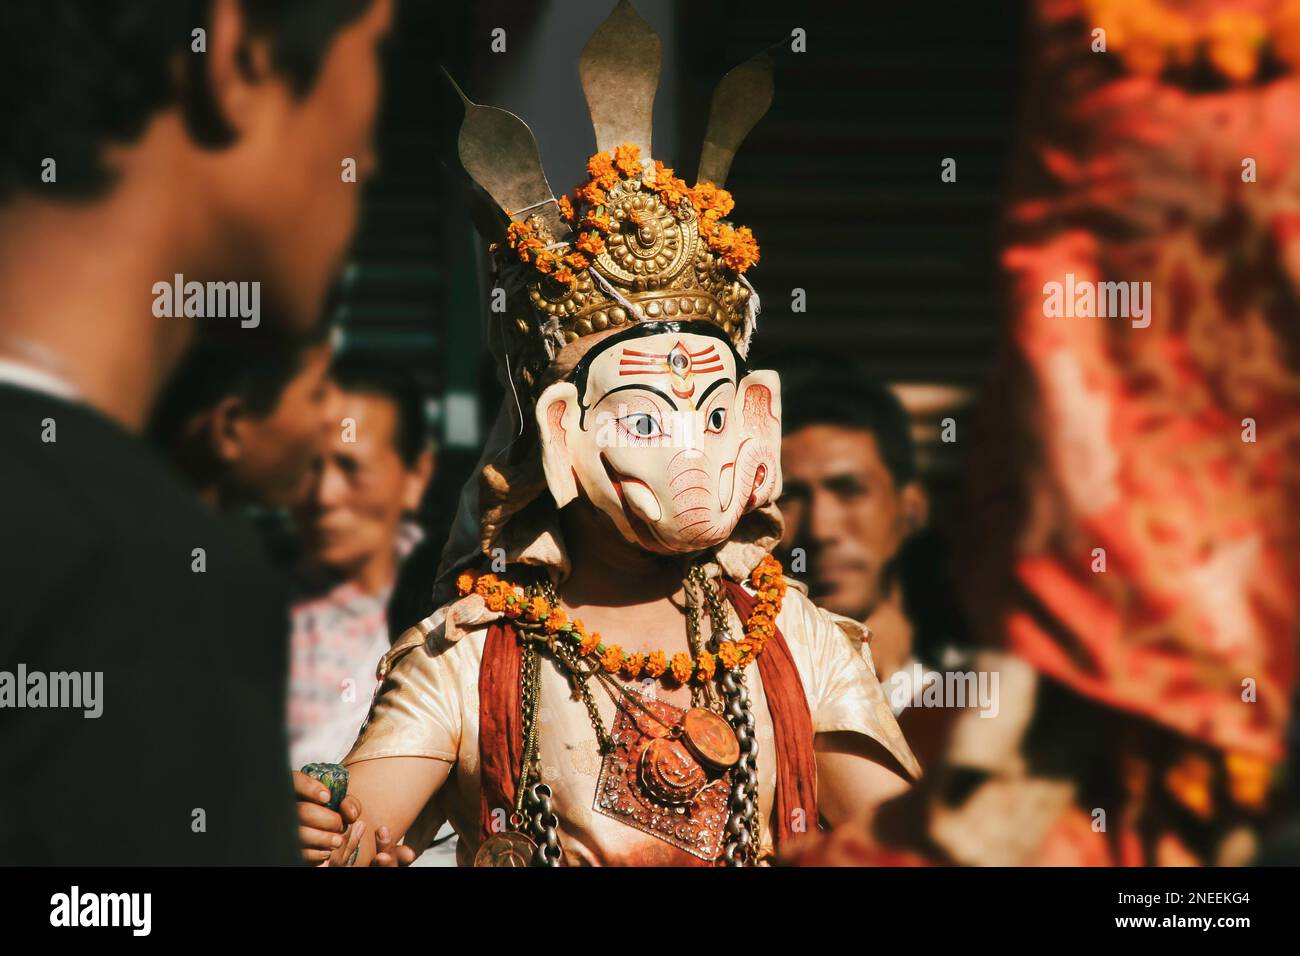 A Person wearing a decorative elephant Ganesh mask, Traditional cultural Nepalese costume at religious street festival celebration in Kathmandu, Nepal Stock Photo